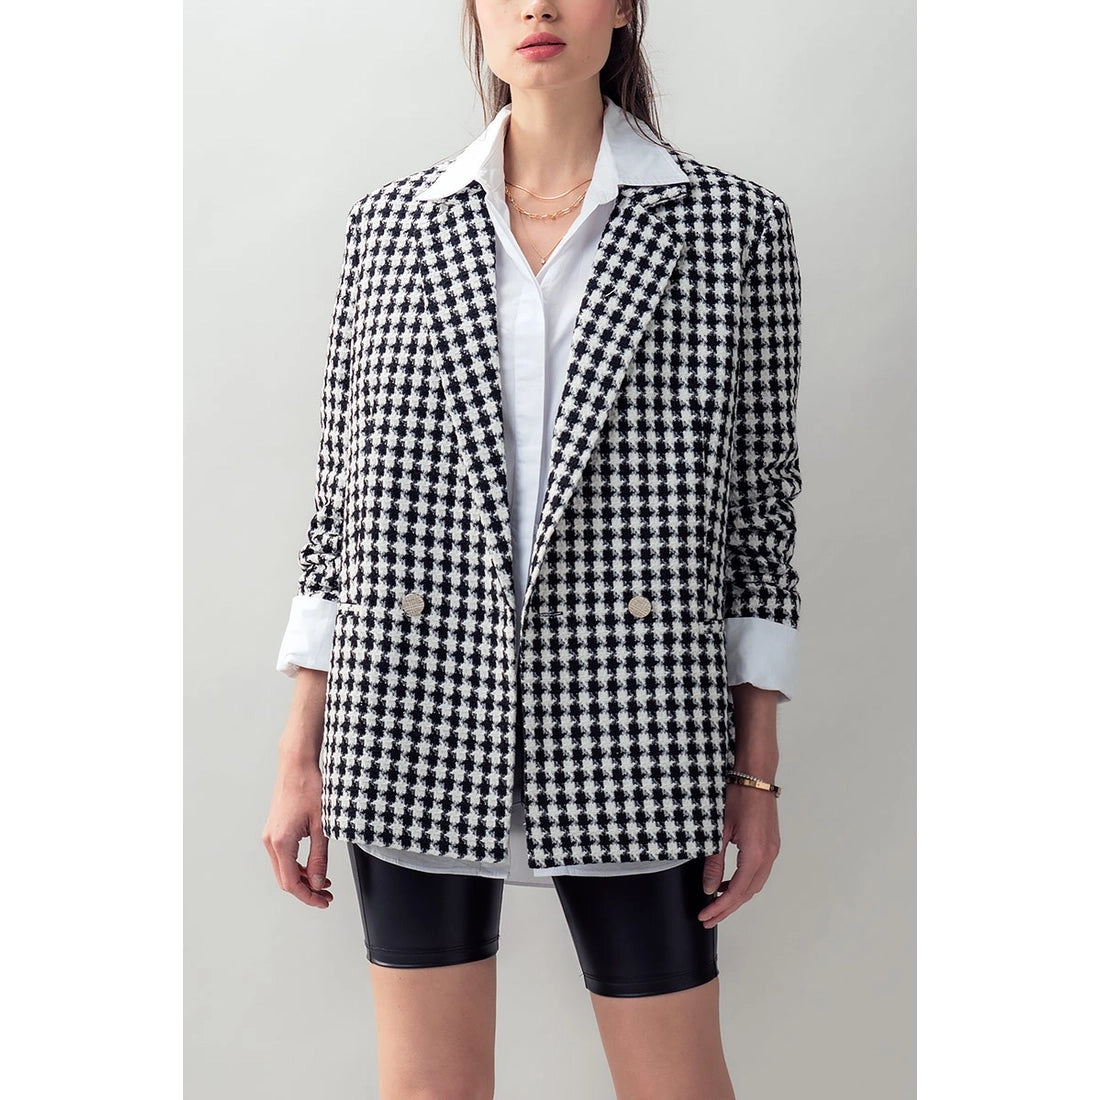 Urban Daizy Oversized Houndstooth Tweed Double Breasted Jacket - Mortise And Tenon